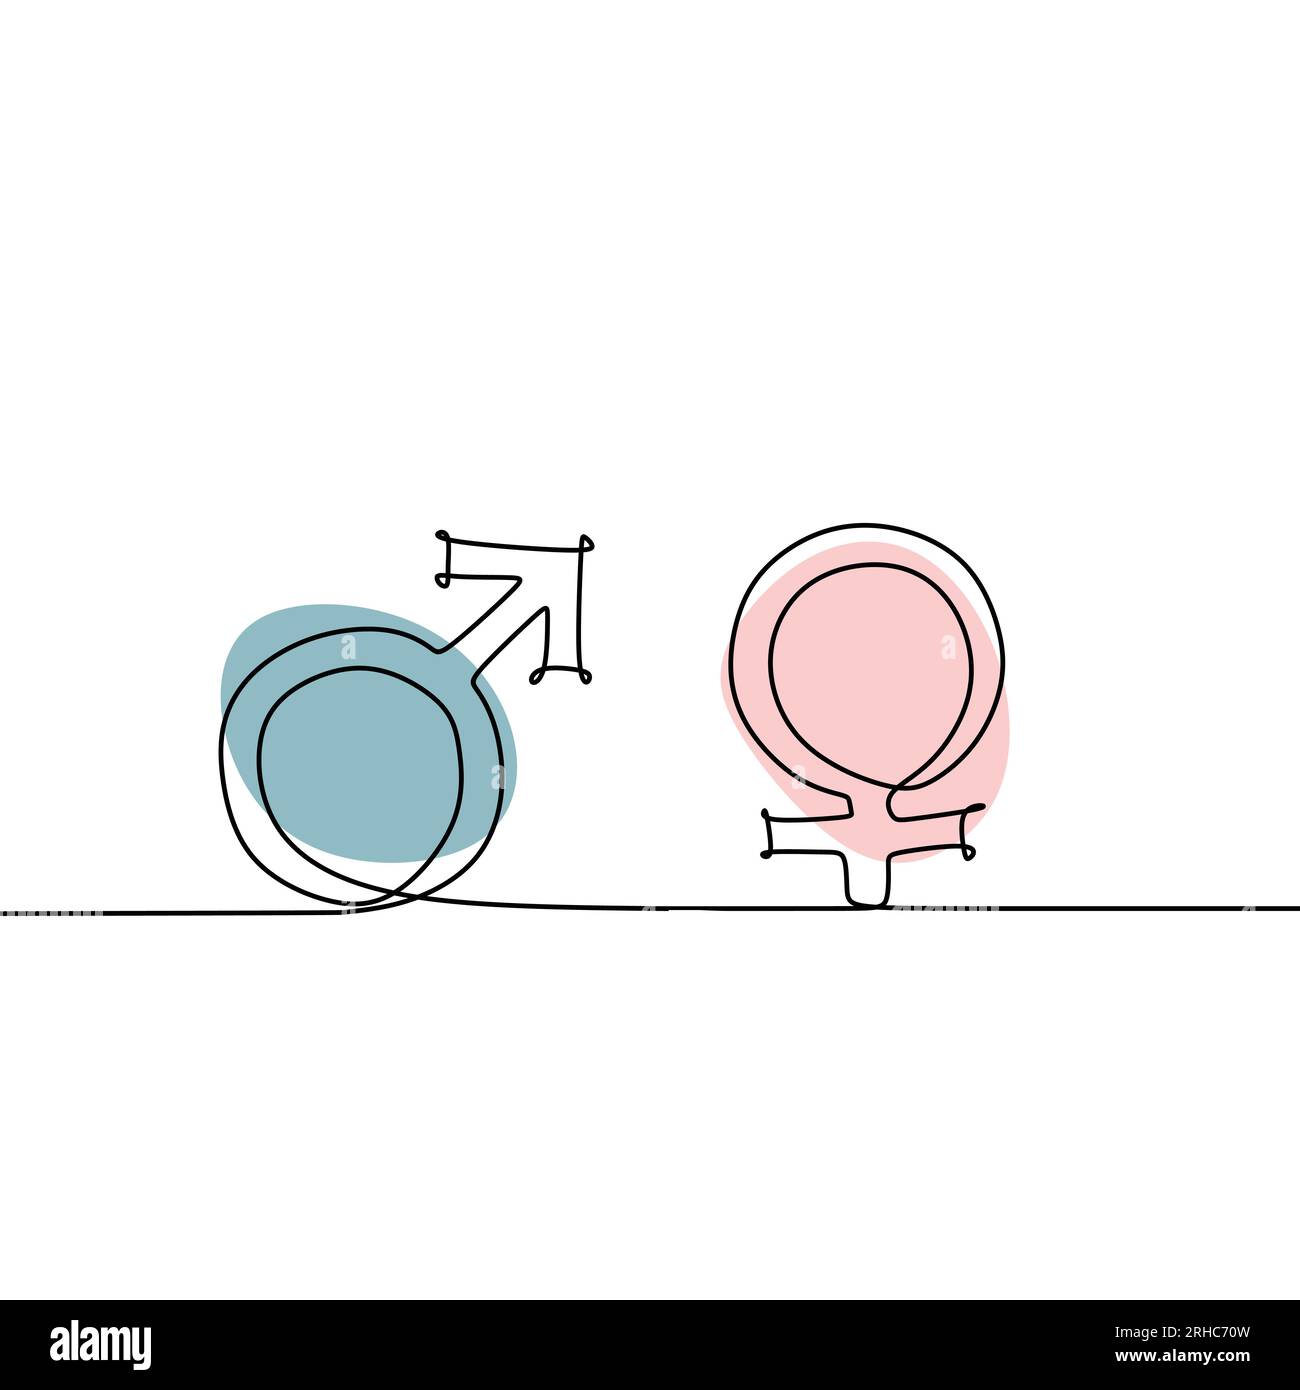 Male and female symbol continuous line drawing vector illustration. Concept of gender sign with blue and pink colors. Stock Vector